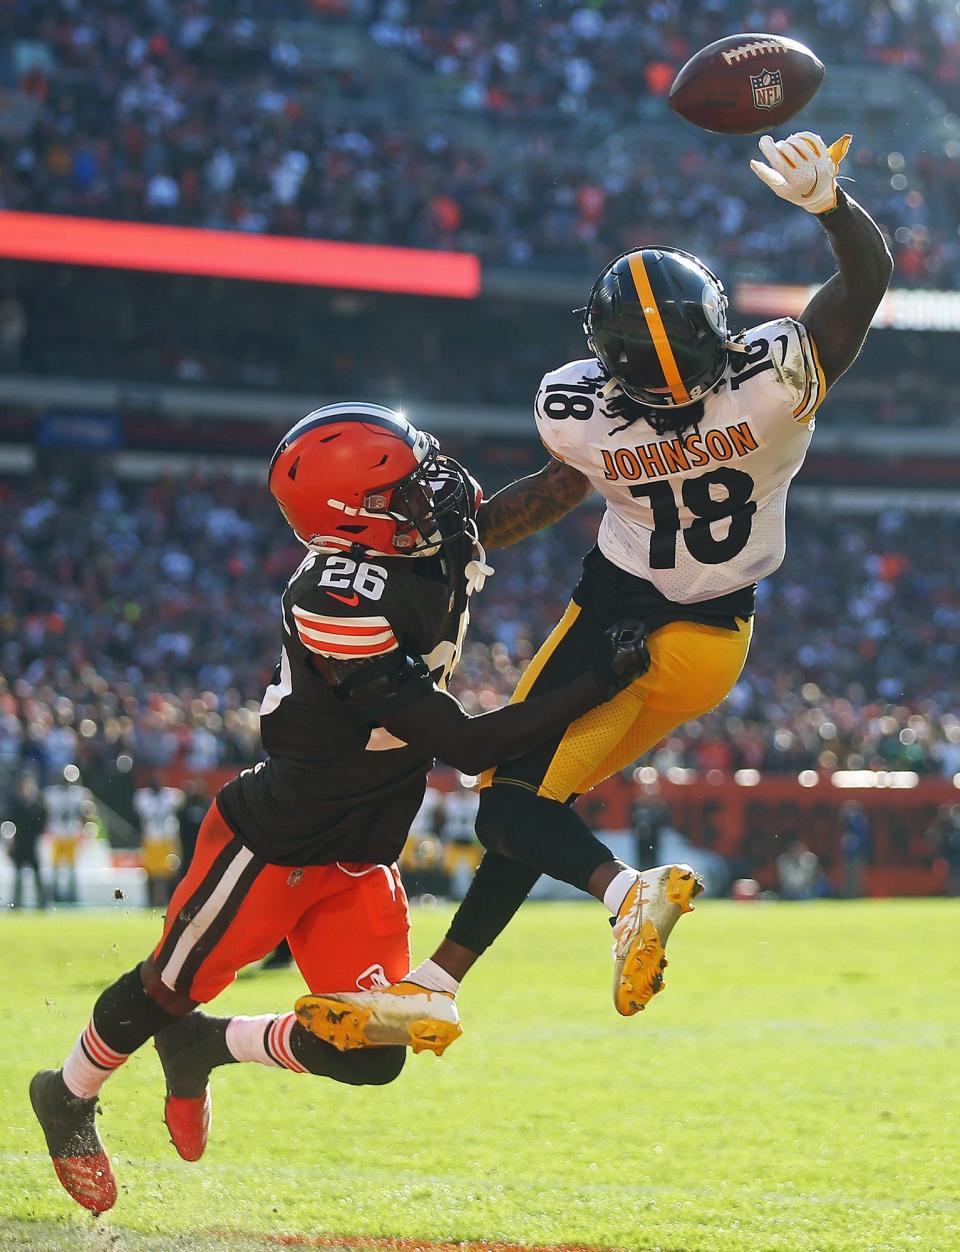 Cleveland Browns cornerback Greedy Williams (26) breaks up a pass intended for Pittsburgh Steelers wide receiver Diontae Johnson (18) to prevent a two-point conversion during the second half of an NFL football game, Sunday, Oct. 31, 2021, in Cleveland, Ohio. [Jeff Lange/Beacon Journal]